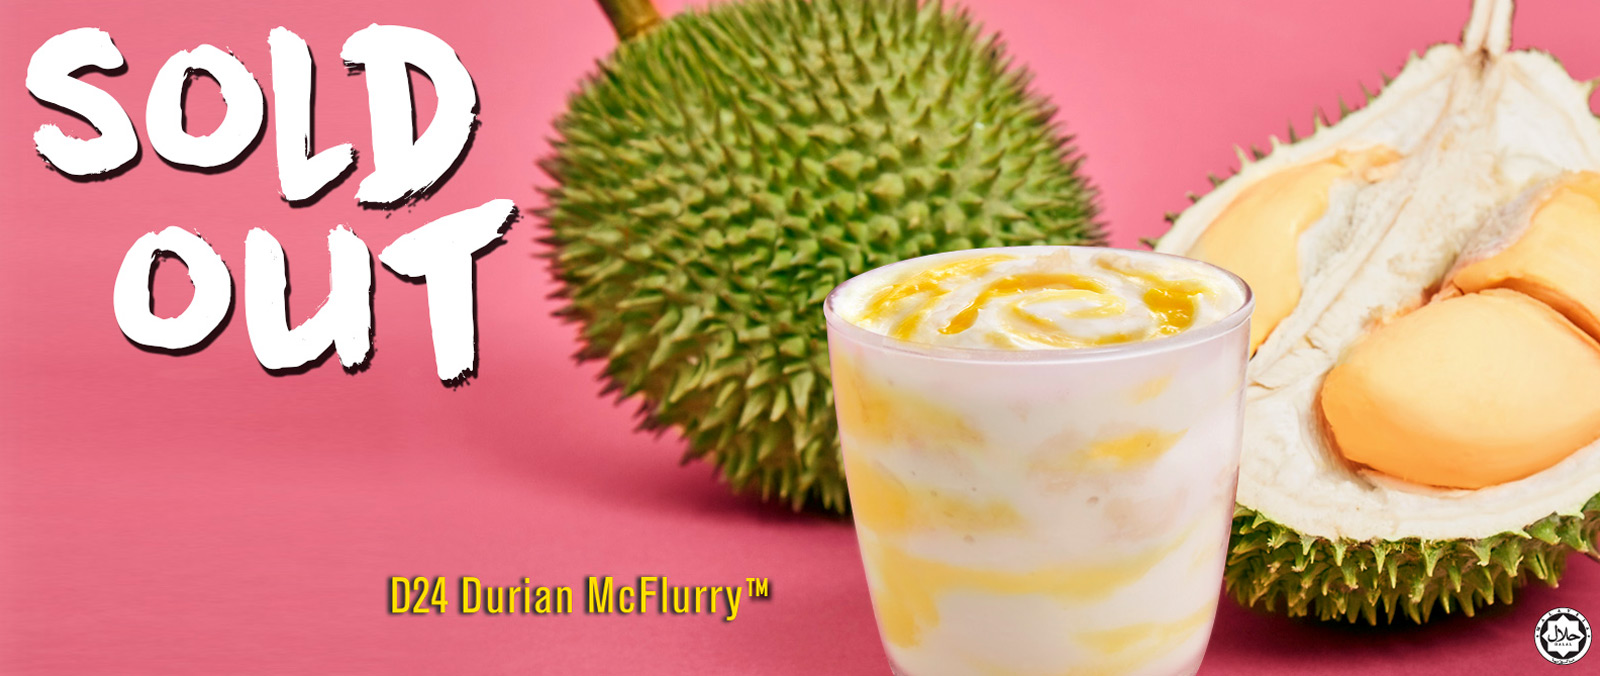 D24 Durian McFlurry: SOLD OUT's image'